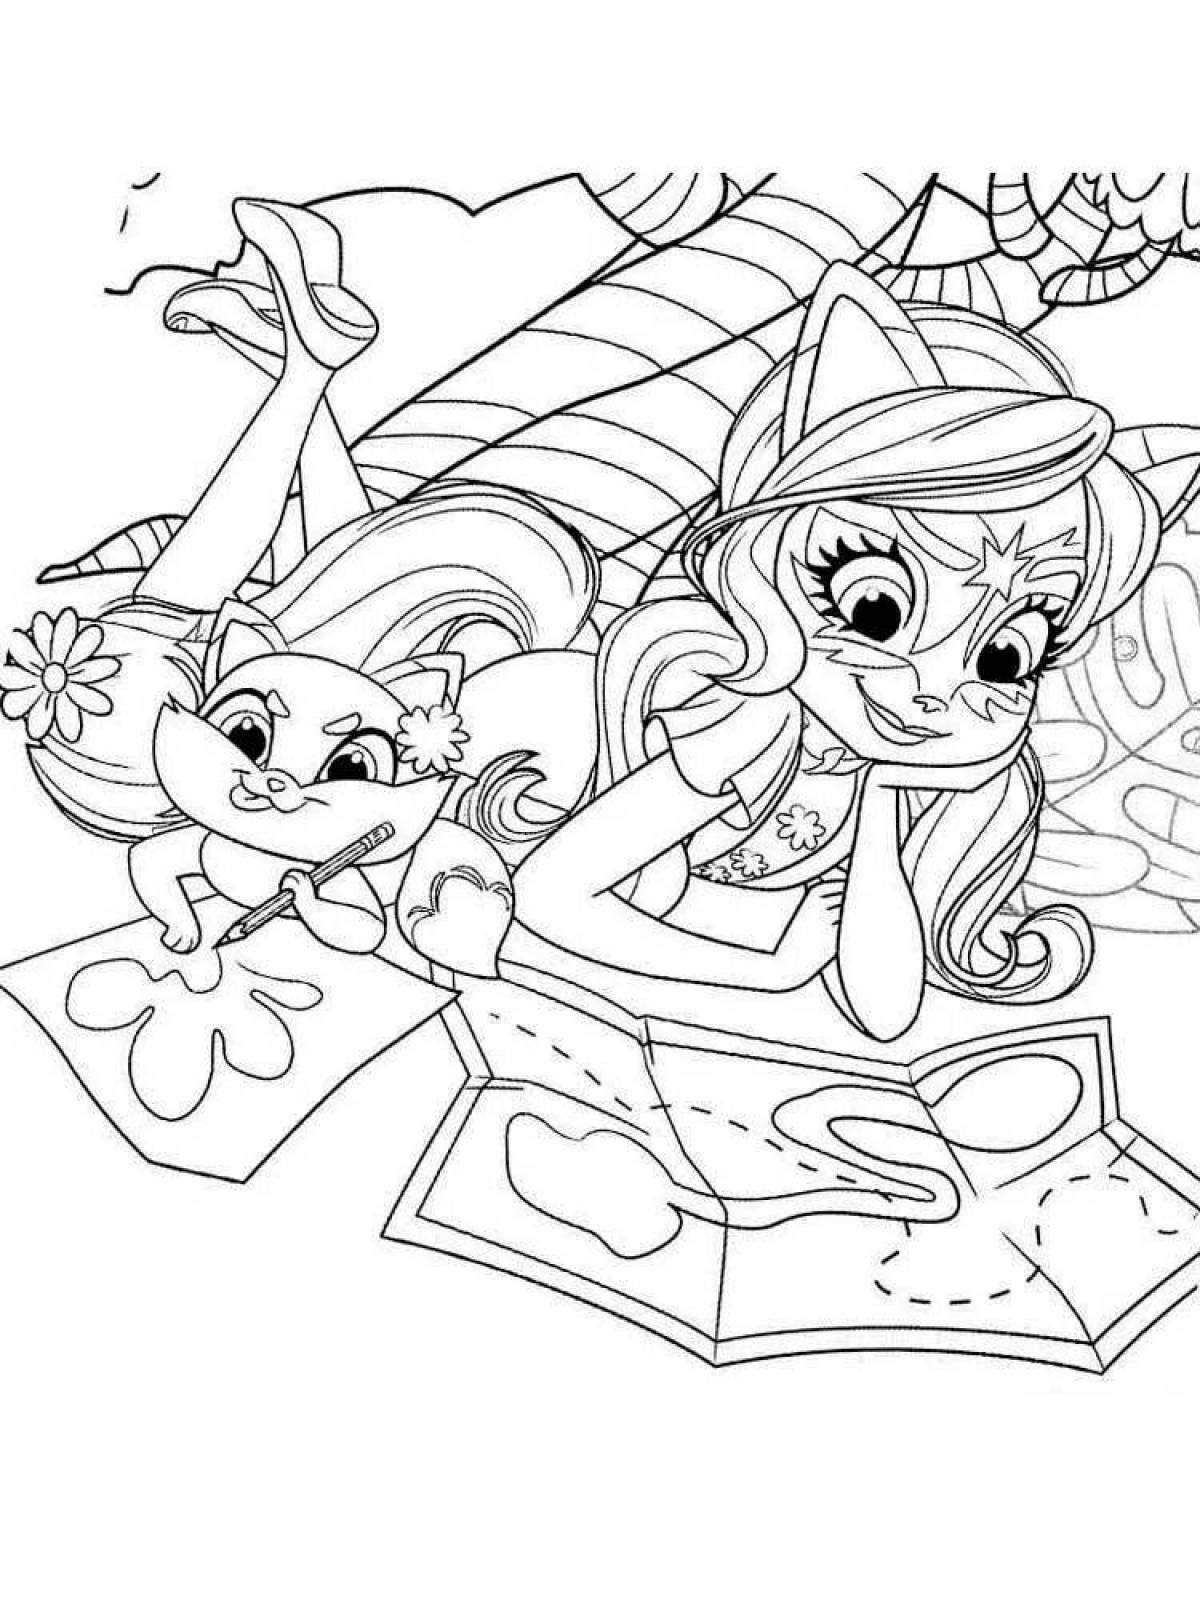 Delightful enchenchimals coloring pages